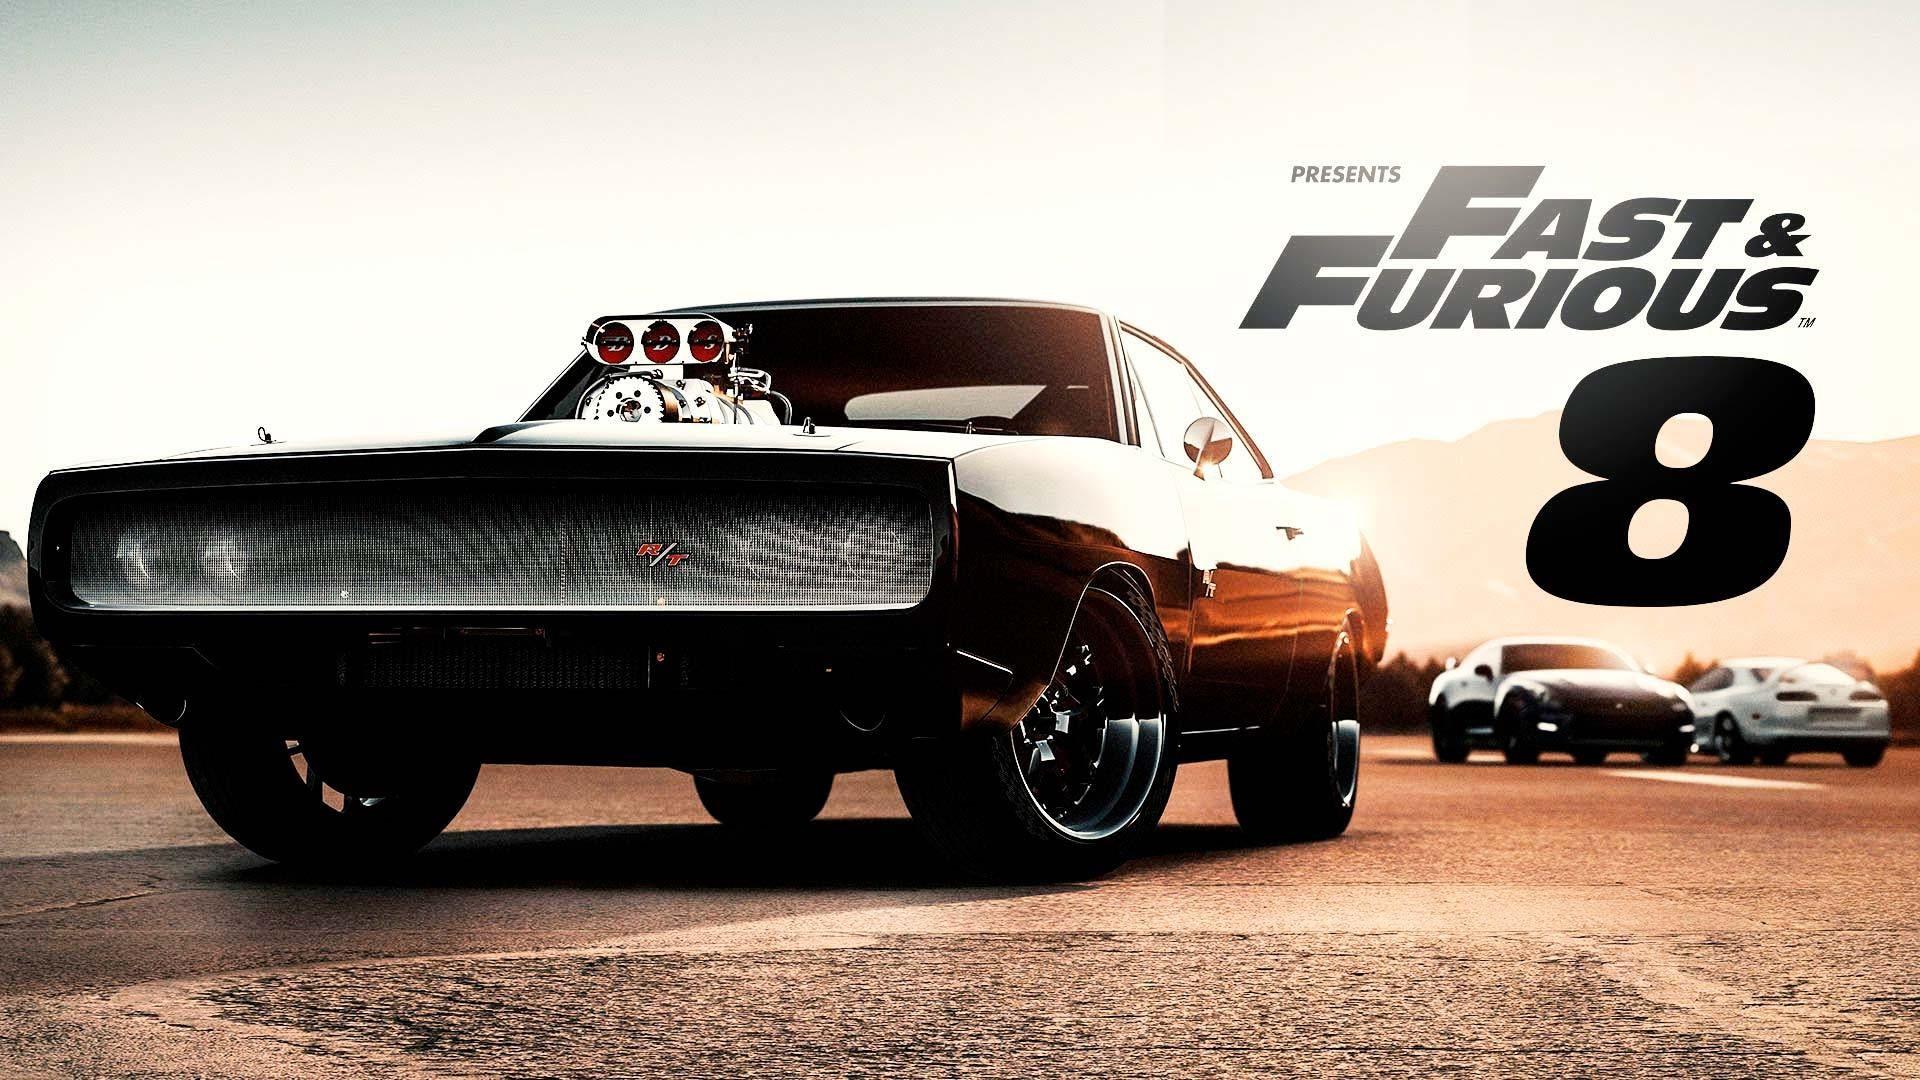 Fast And Furious Cars Wallpaper Wallpaper. Fast and furious, Fate of the furious, Cars music